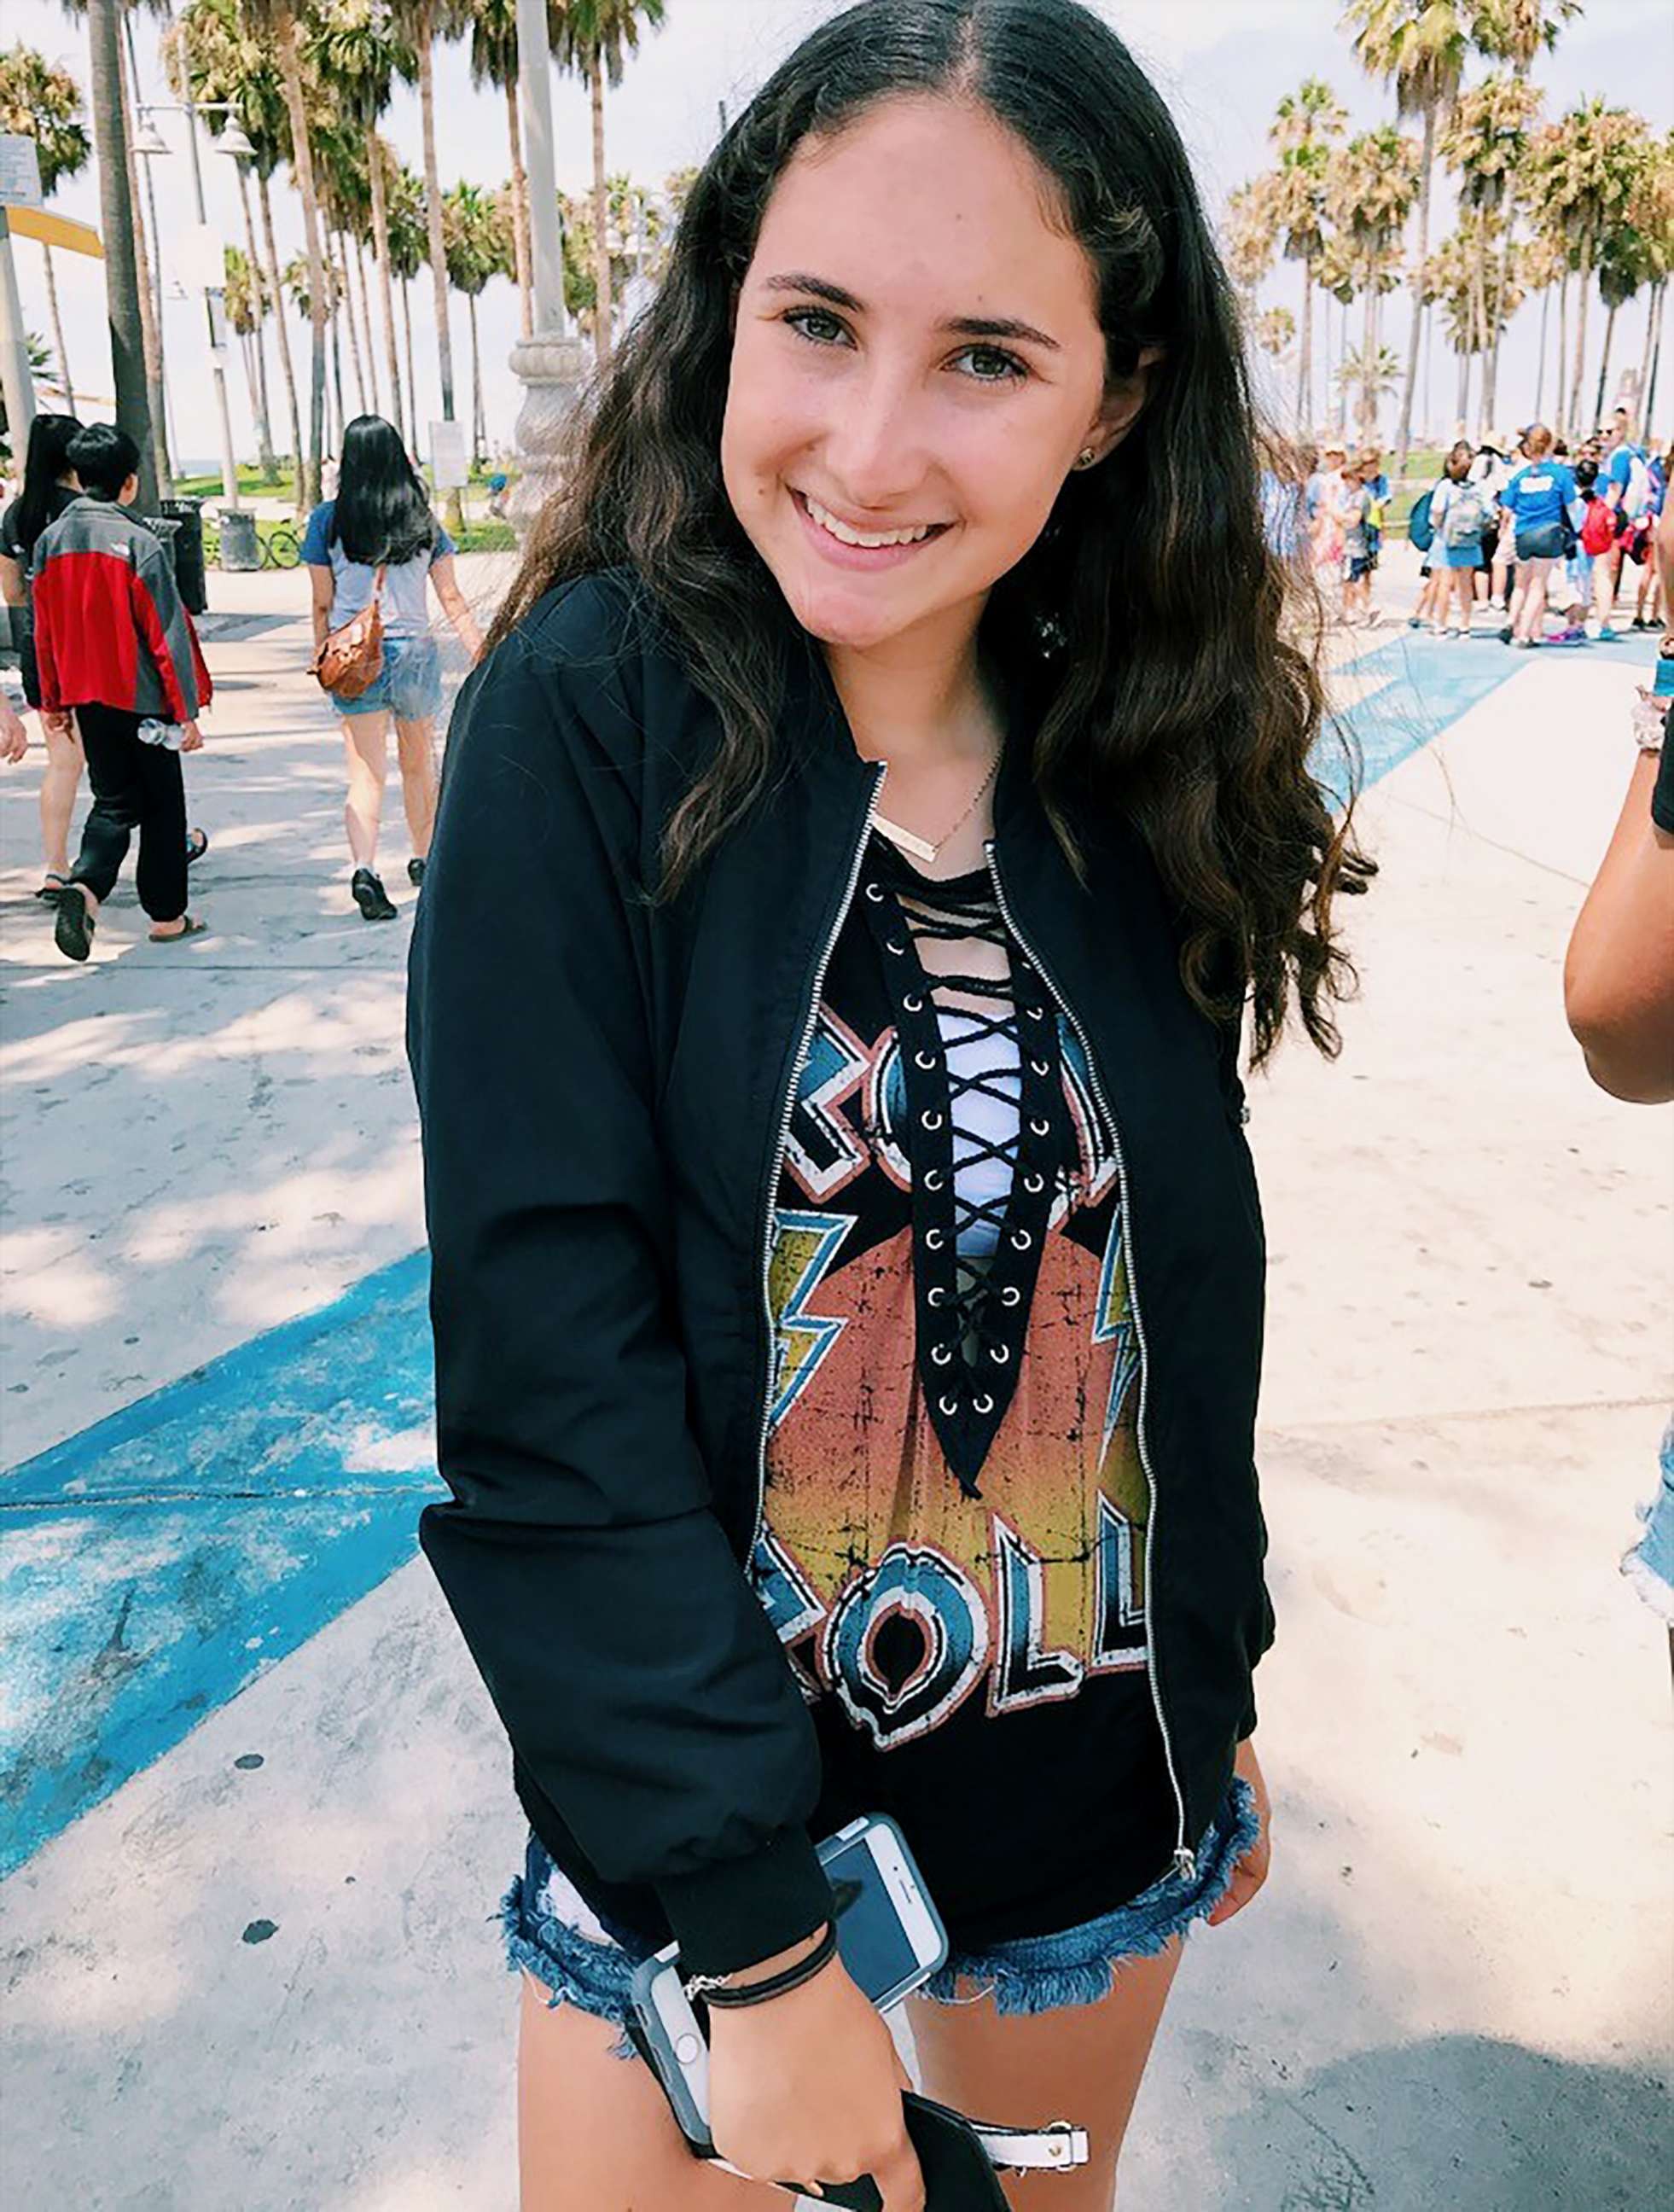 PHOTO: Leni Steinhardt, 15, a sophomore at Marjory Stoneman Douglas High School in Parkland, Florida, was in chemistry when a gunman opened fire killing 17 people at her school on Feb. 14, 2018.